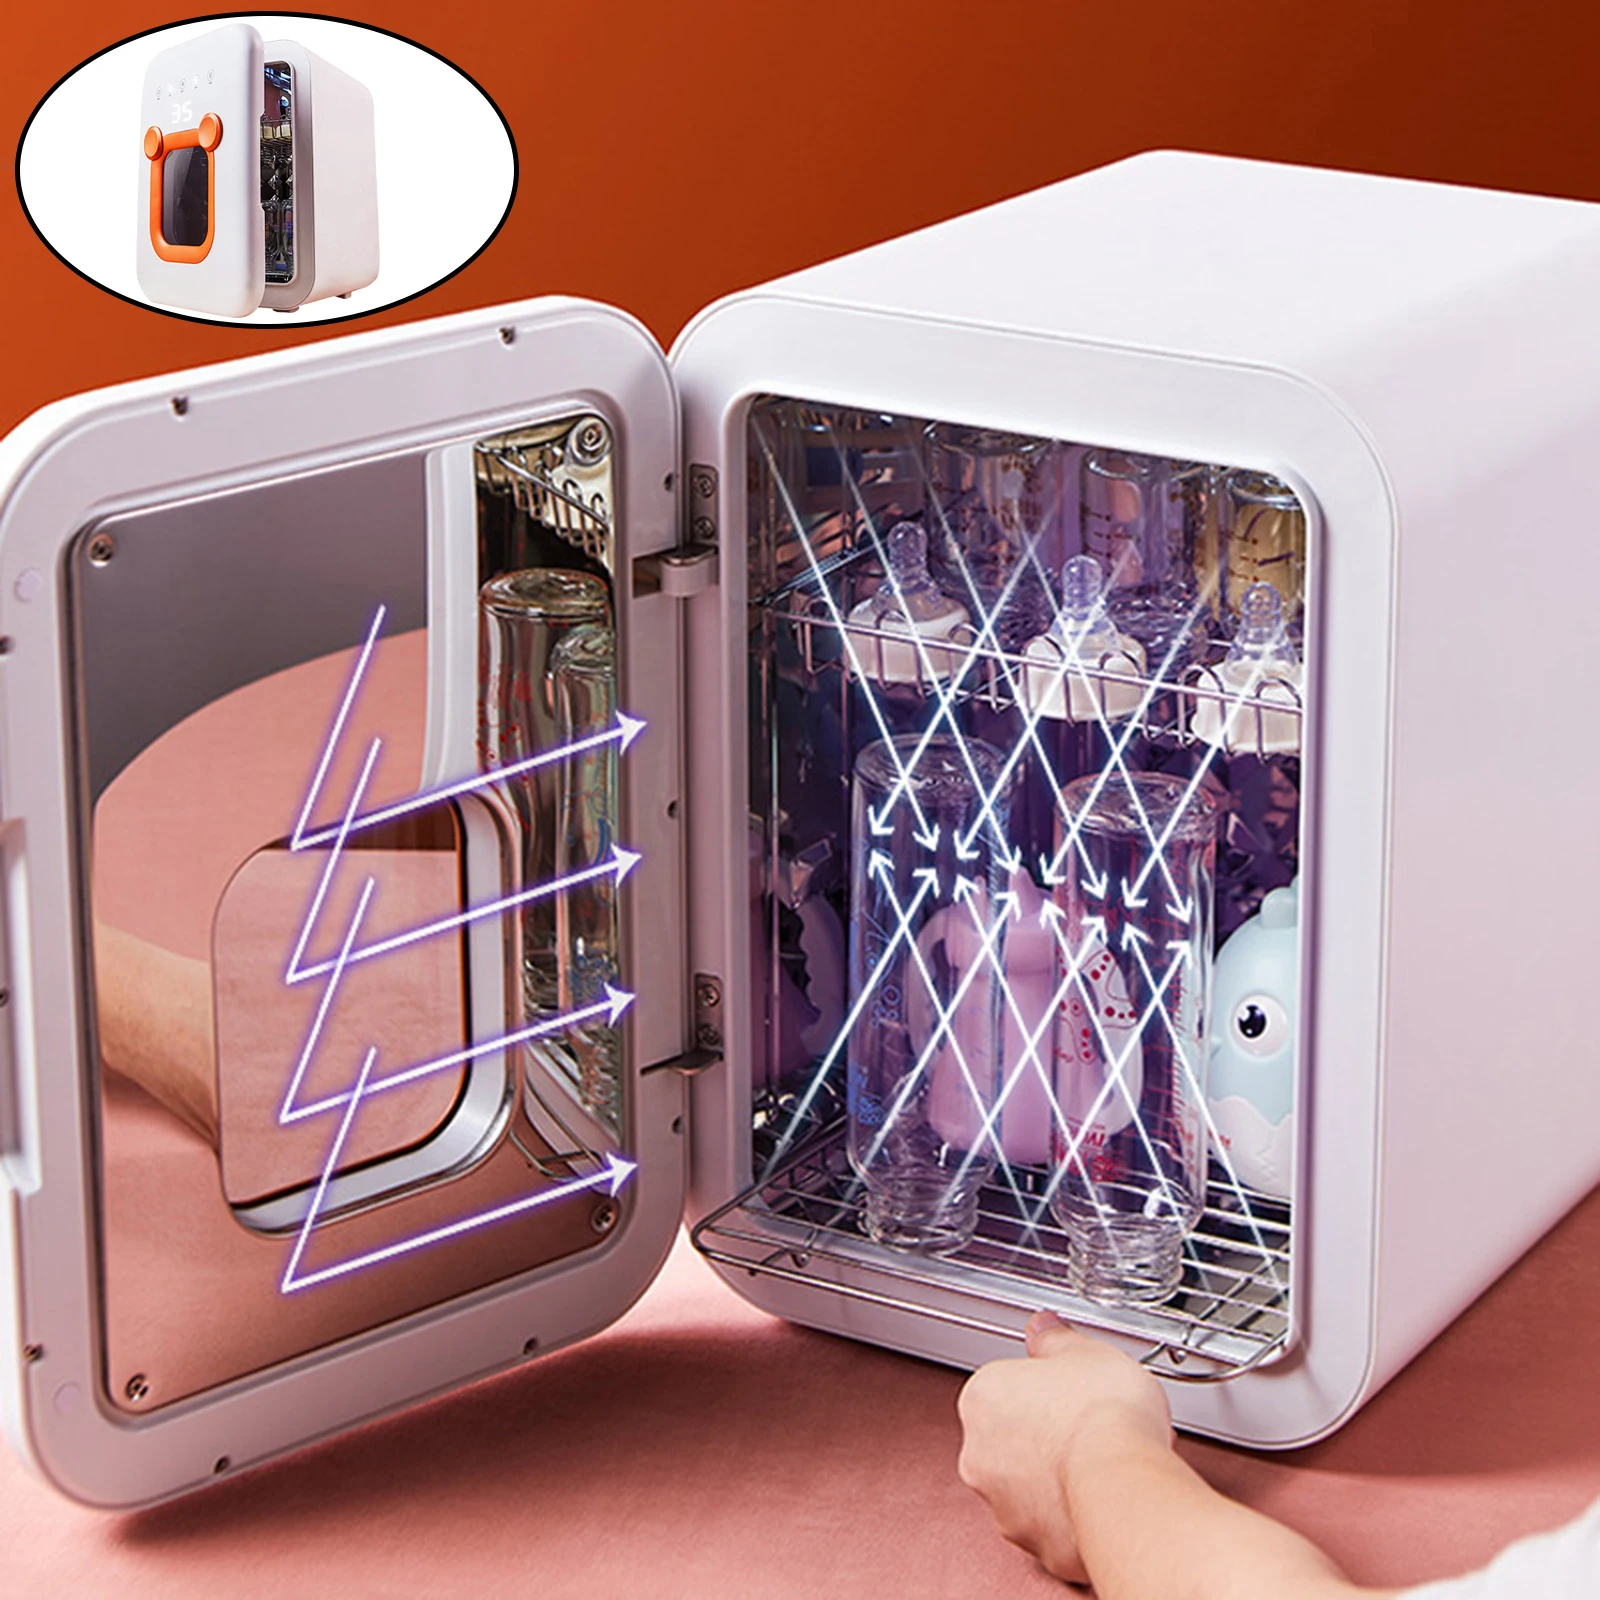 UV Disinfection Cabinet for Baby Bottles, Toys, Smartphones, Salon Tools